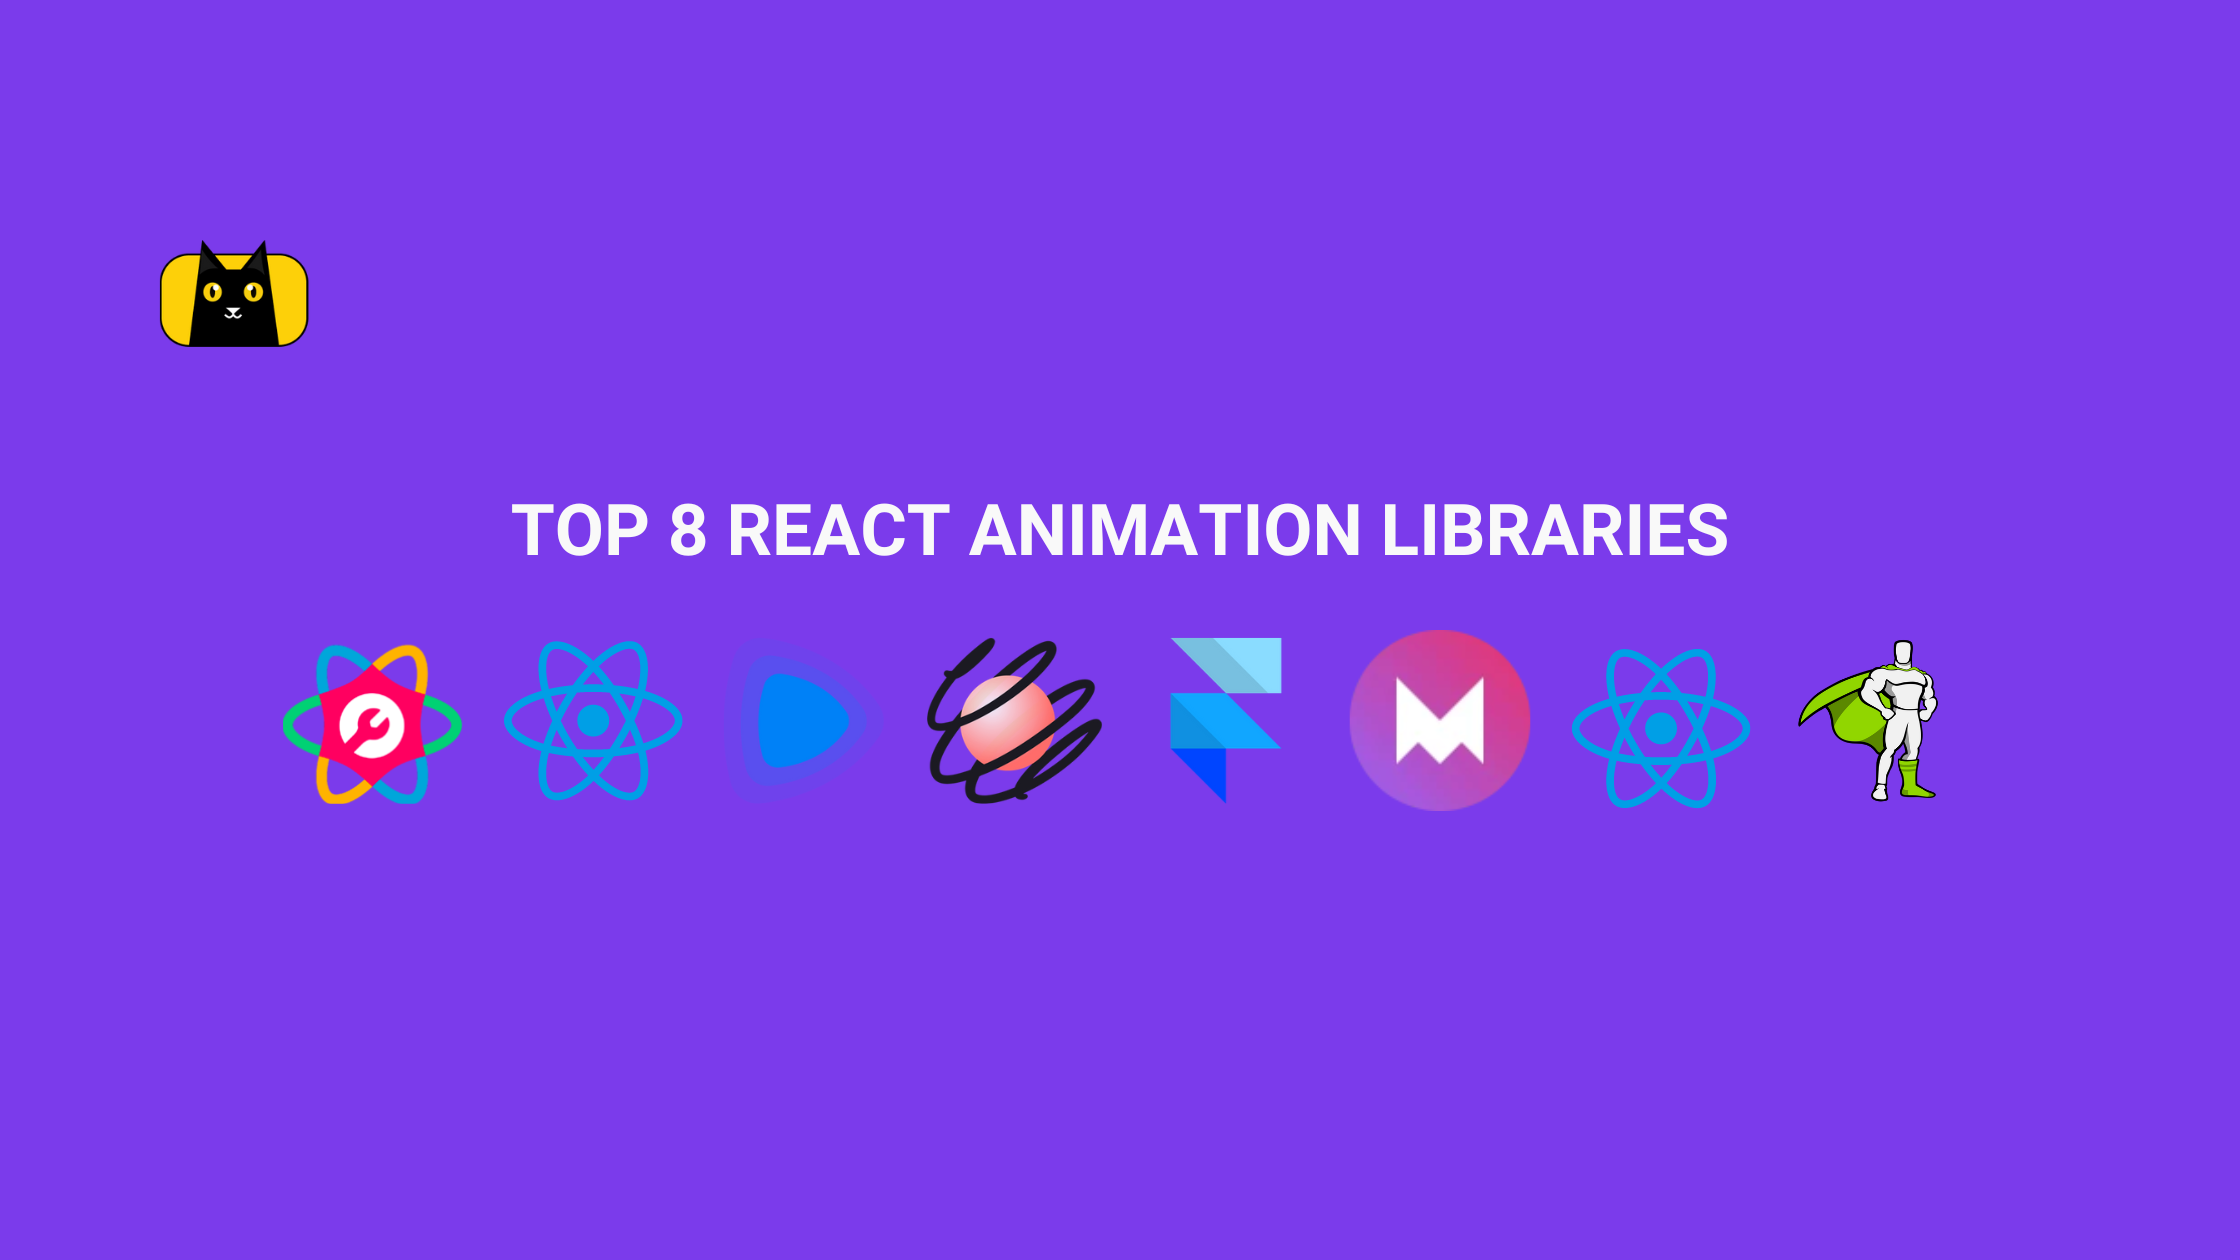 Impress Your Users Using The Top 8 React Animation Libraries